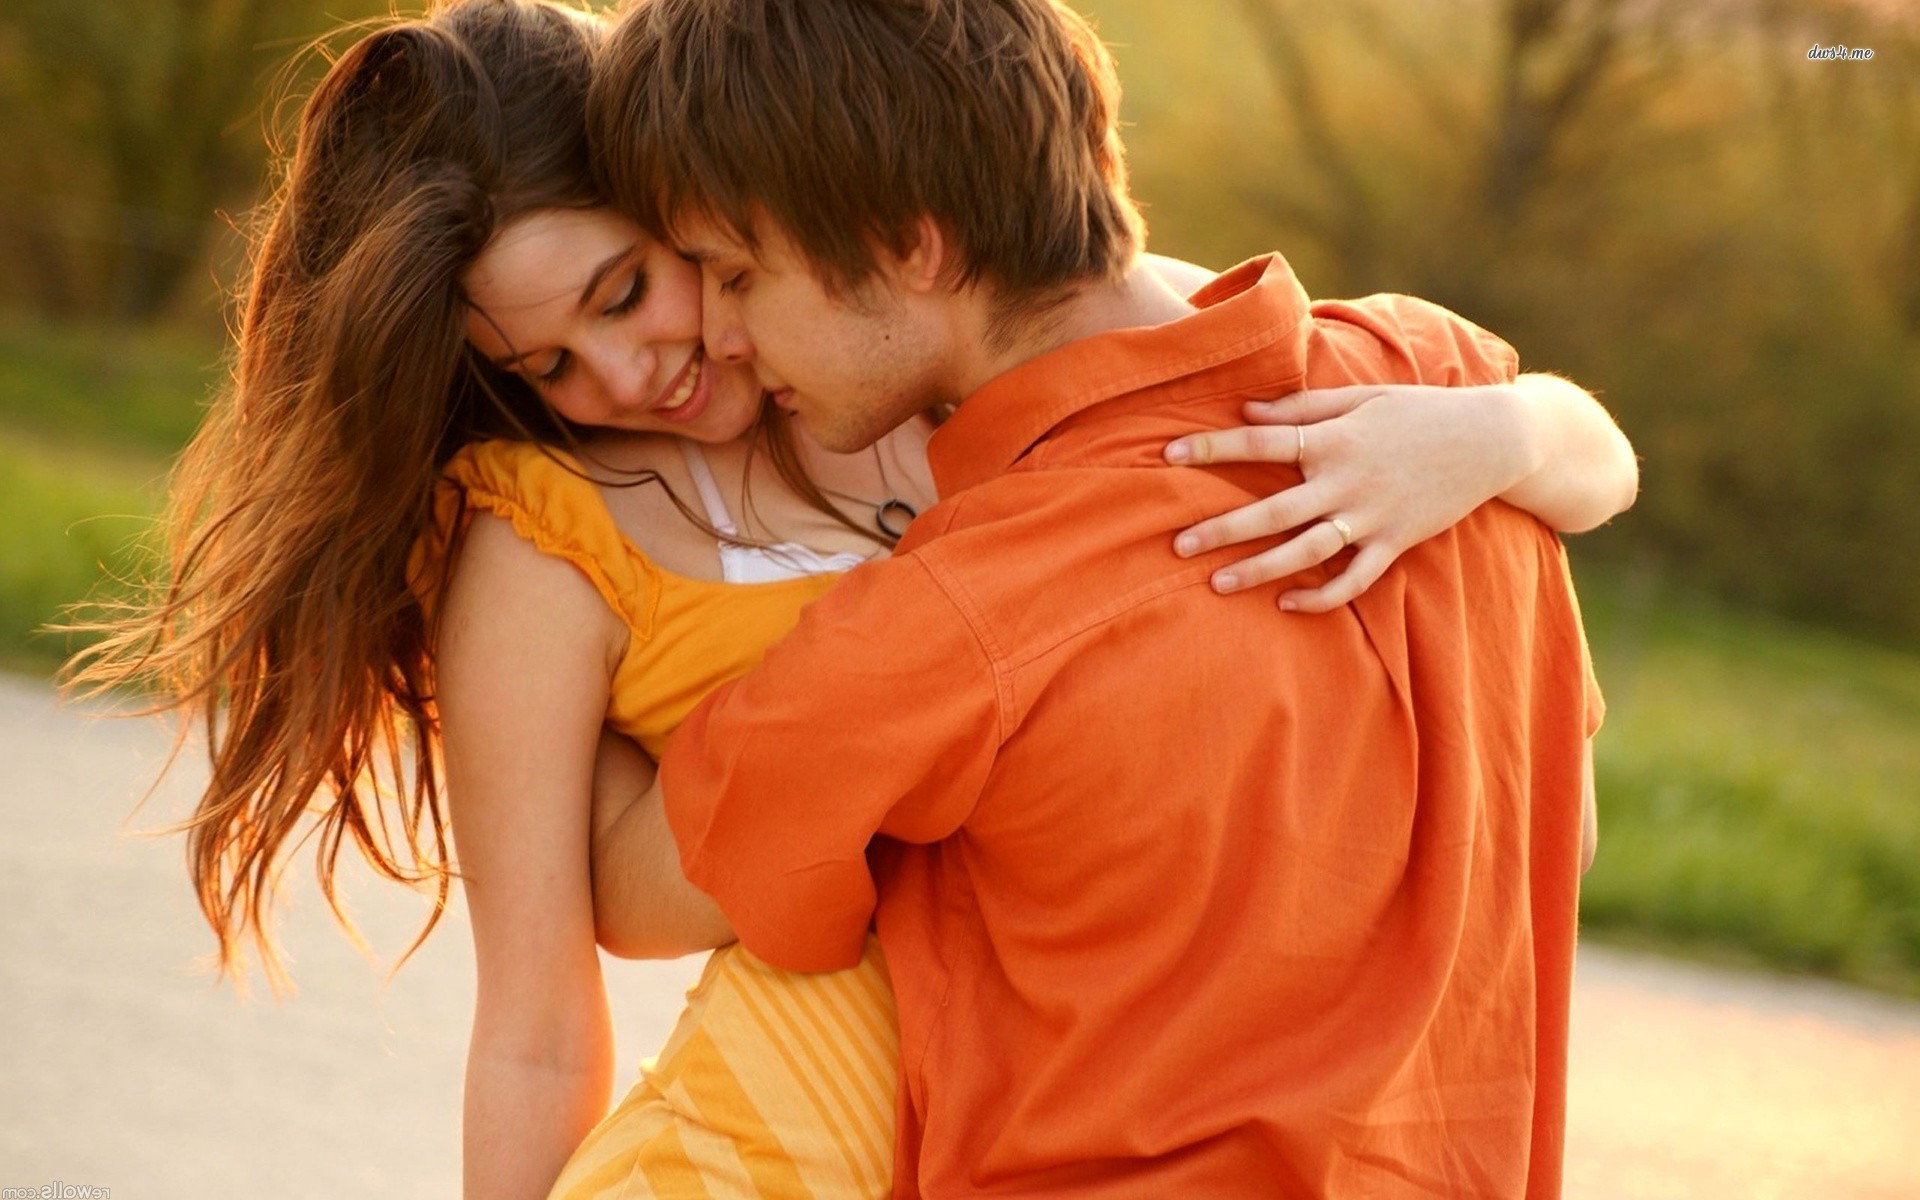 Cute Couple Hug For Mobile Wallpapers For Iphone Is Love Couple Images Hd 1920x1200